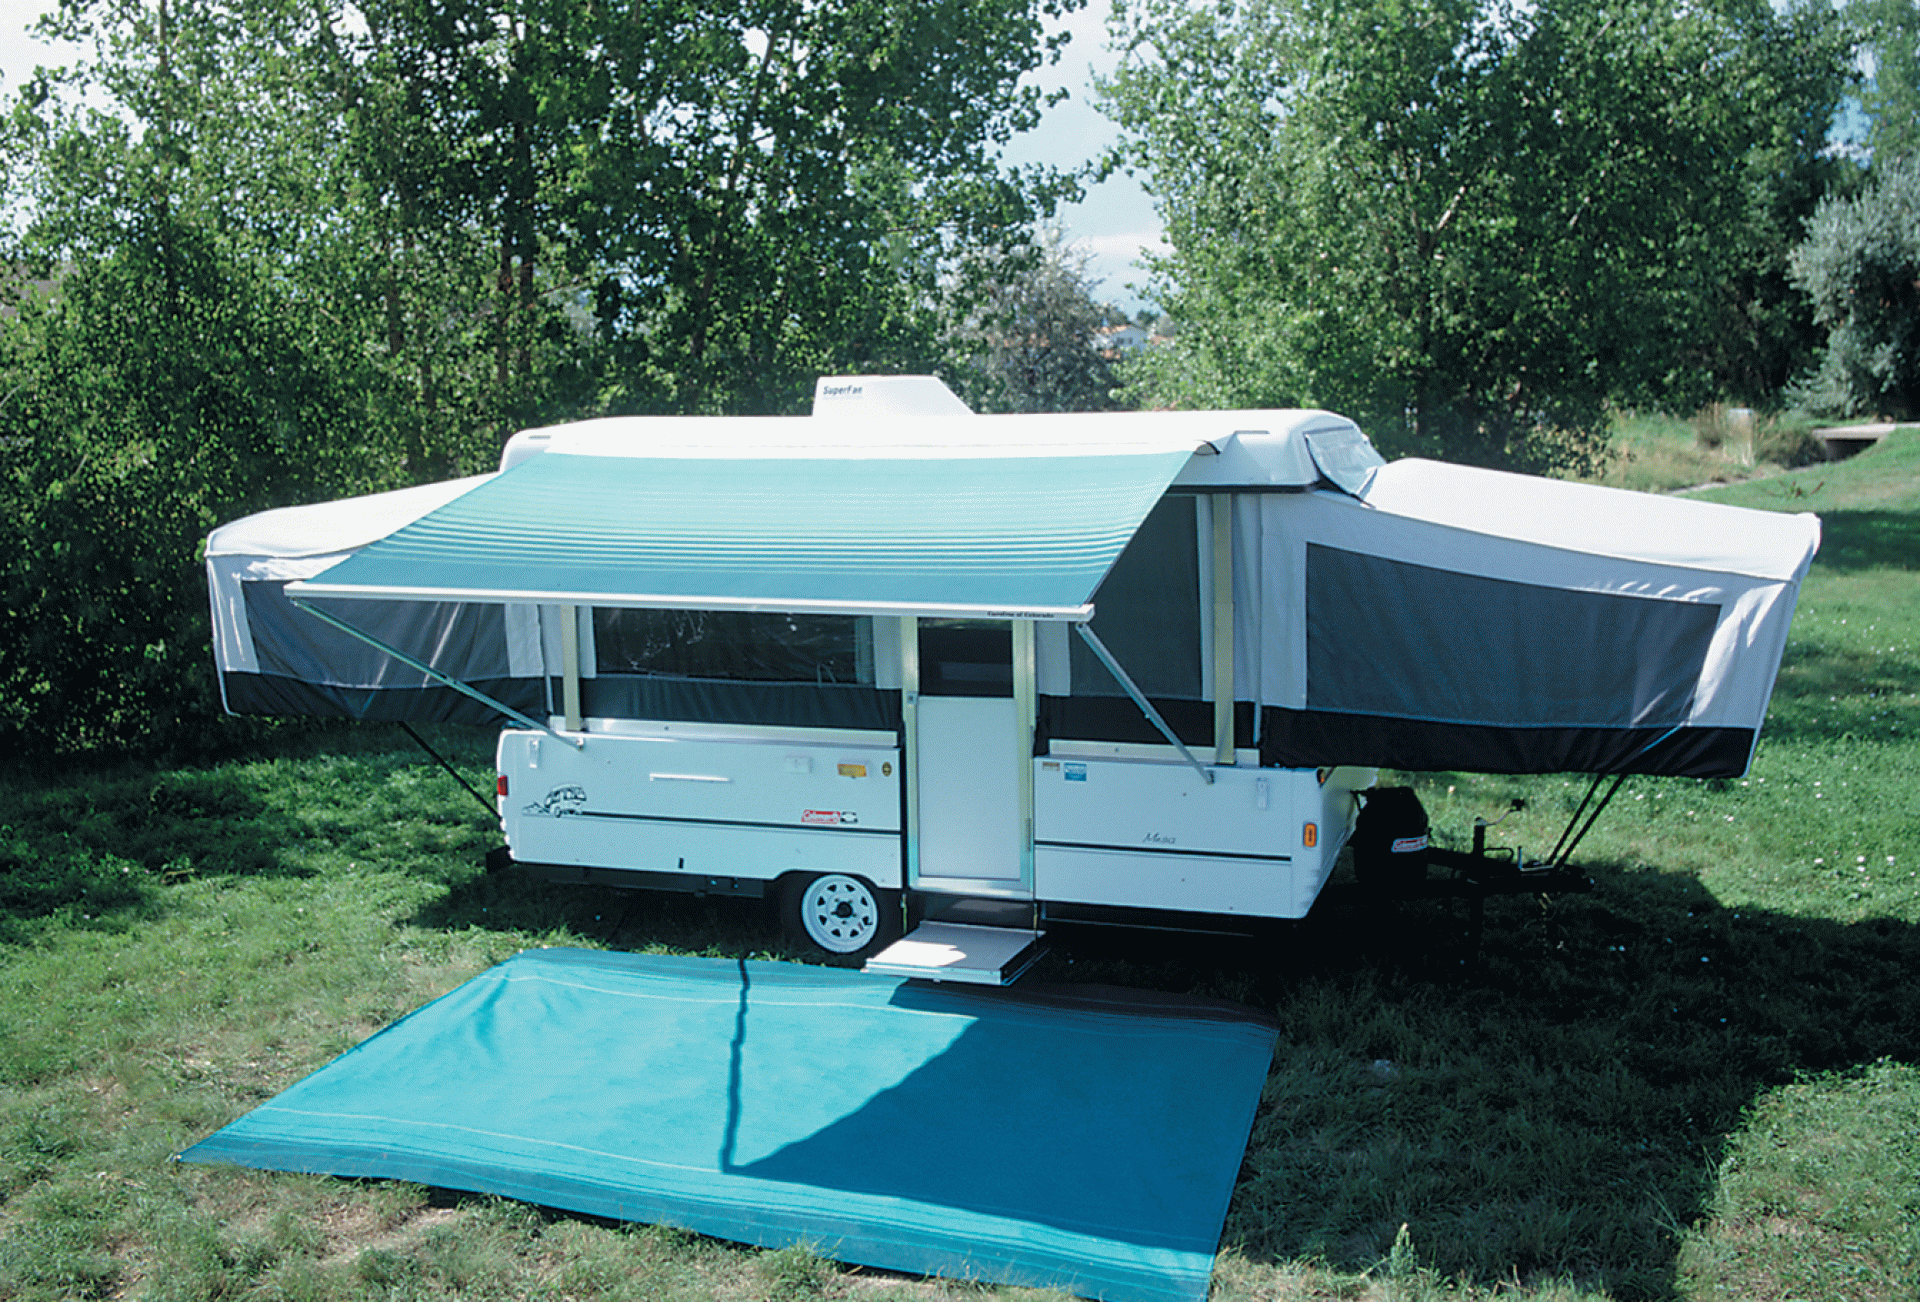 CAREFREE OF COLORADO | 981388A00 | Campout Awning Metric 3.5 Metric 11' 6" Sierra Brown Dune Stripe with White Bag